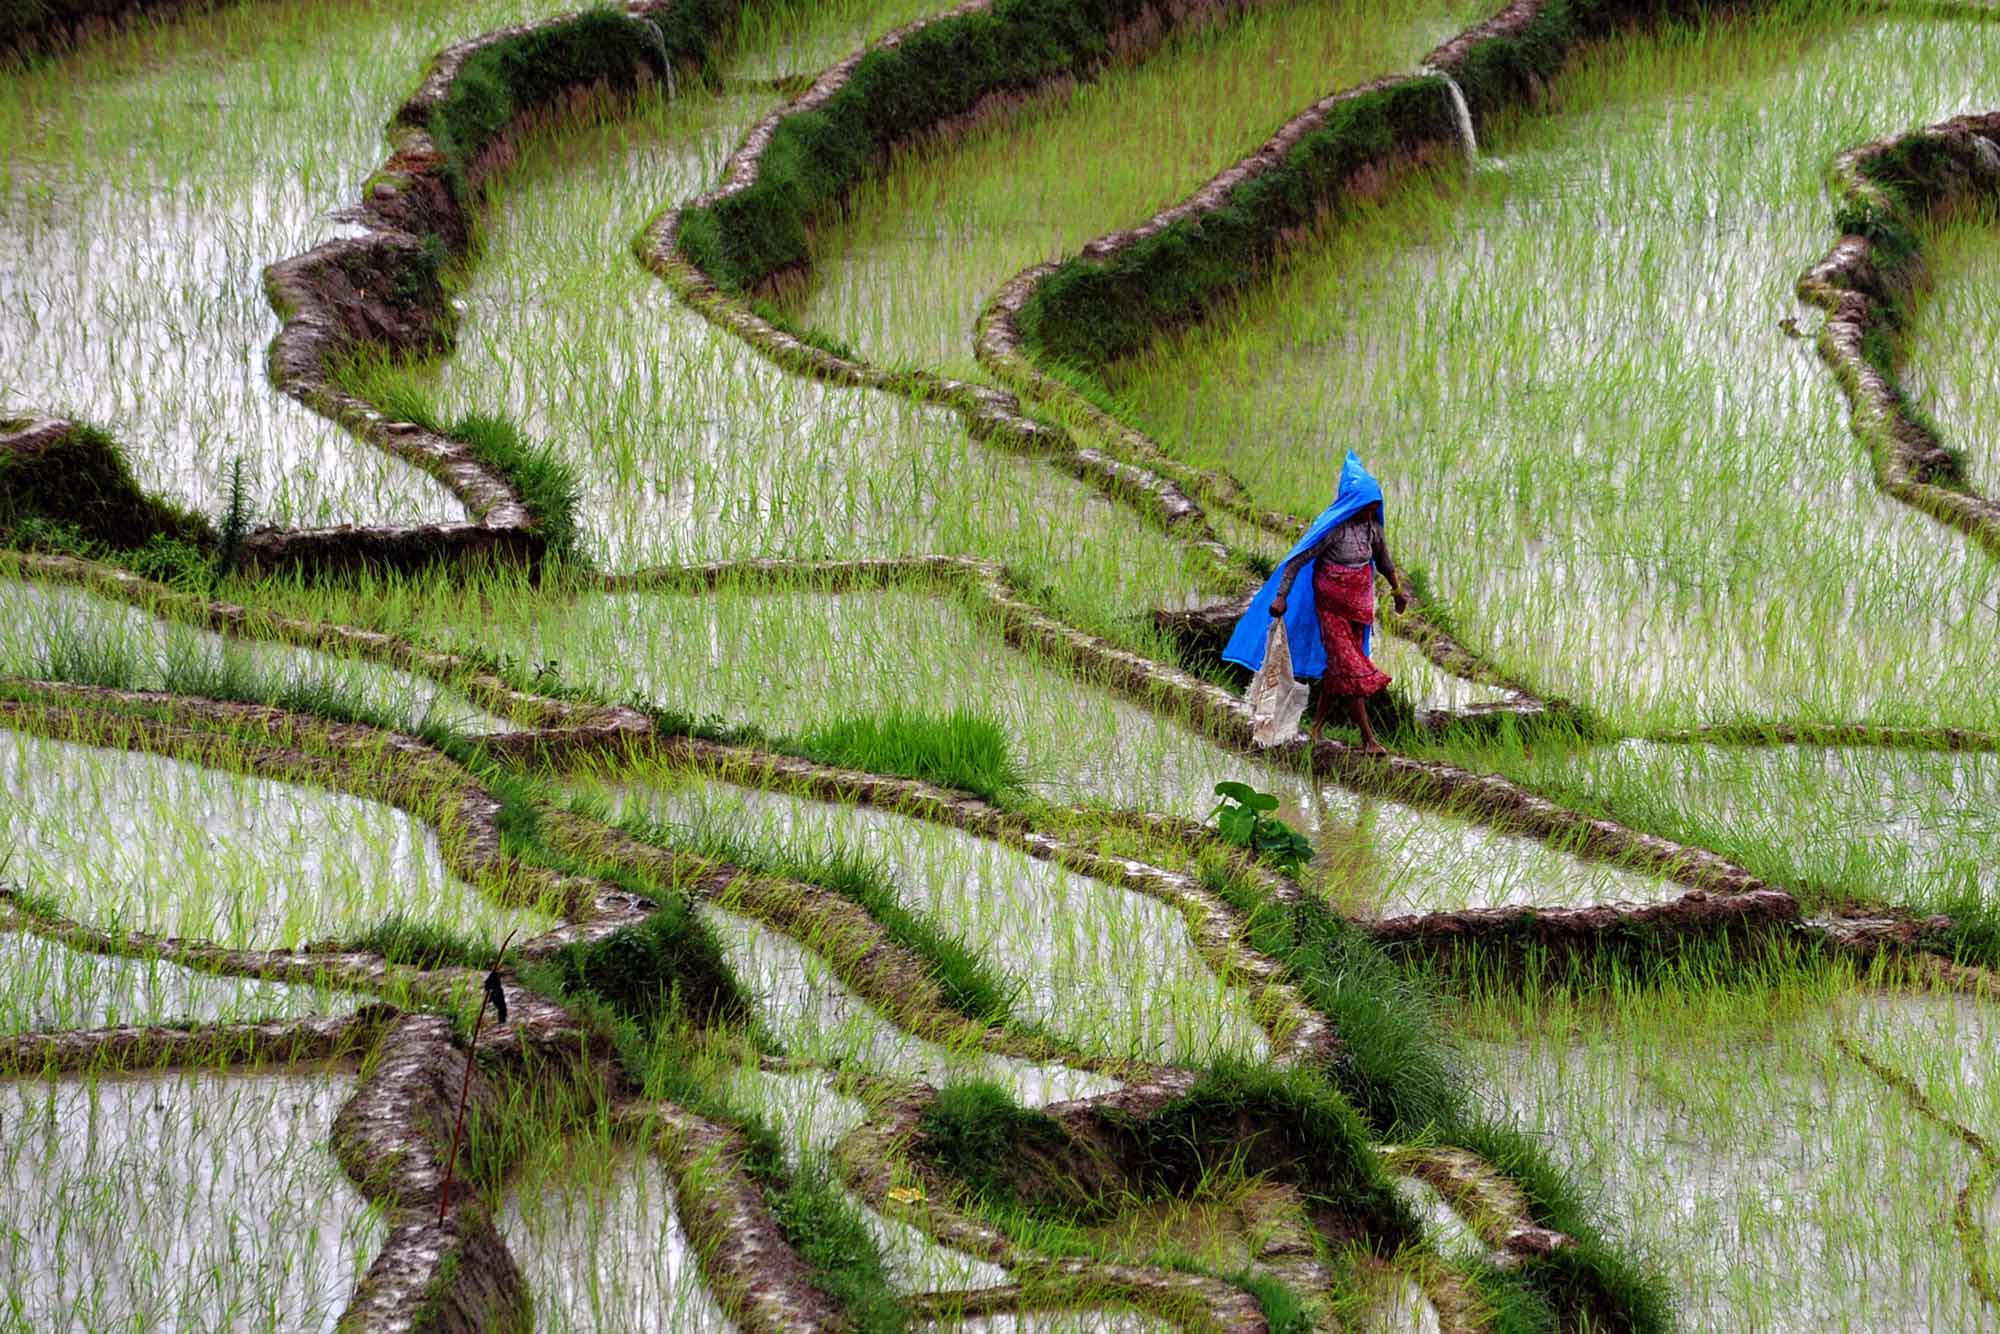 A Nepalese farmer walks past rice paddy fields at Khokana village on the outskirts of Kathmandu on July 19, 2012. Rice accounts for almost 50 percent of cereal production in Nepal, which is particularly dependent on rainfall because less than one-third of its agricultural land is irrigated. AFP PHOTO/Prakash MATHEMA / AFP PHOTO / PRAKASH MATHEMA